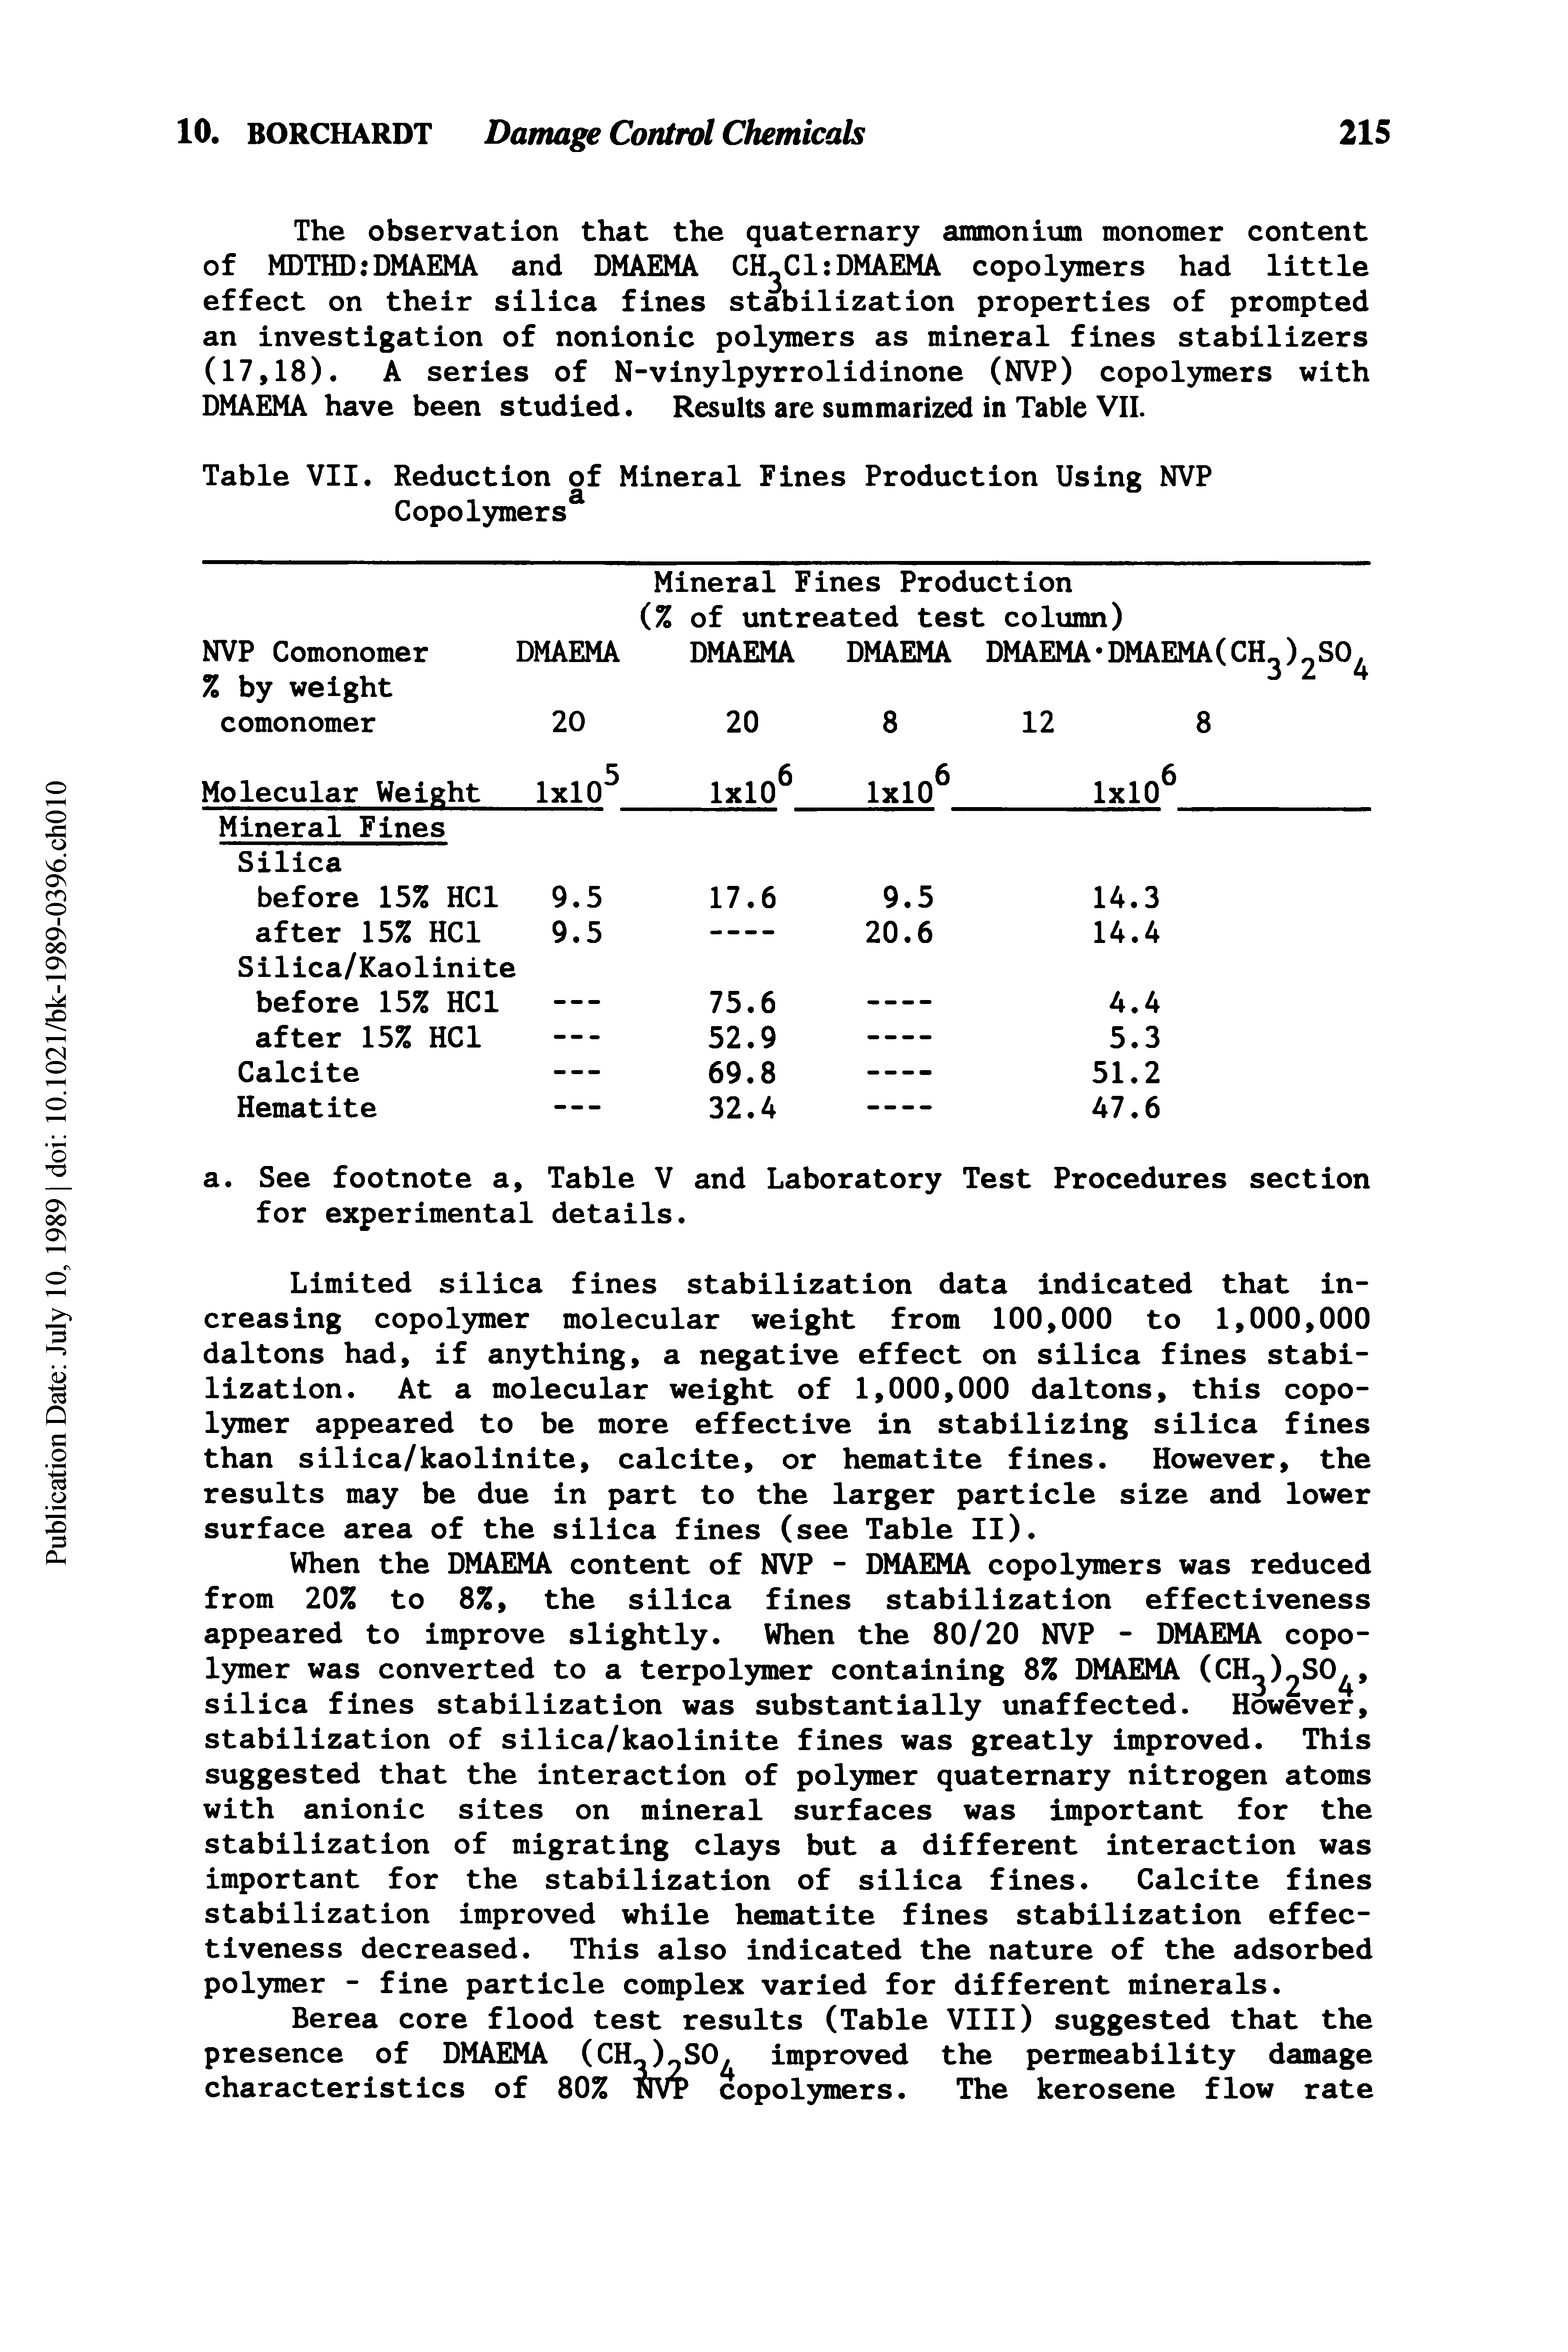 Table VII. Reduction of Mineral Fines Production Using NVP Copolymers...